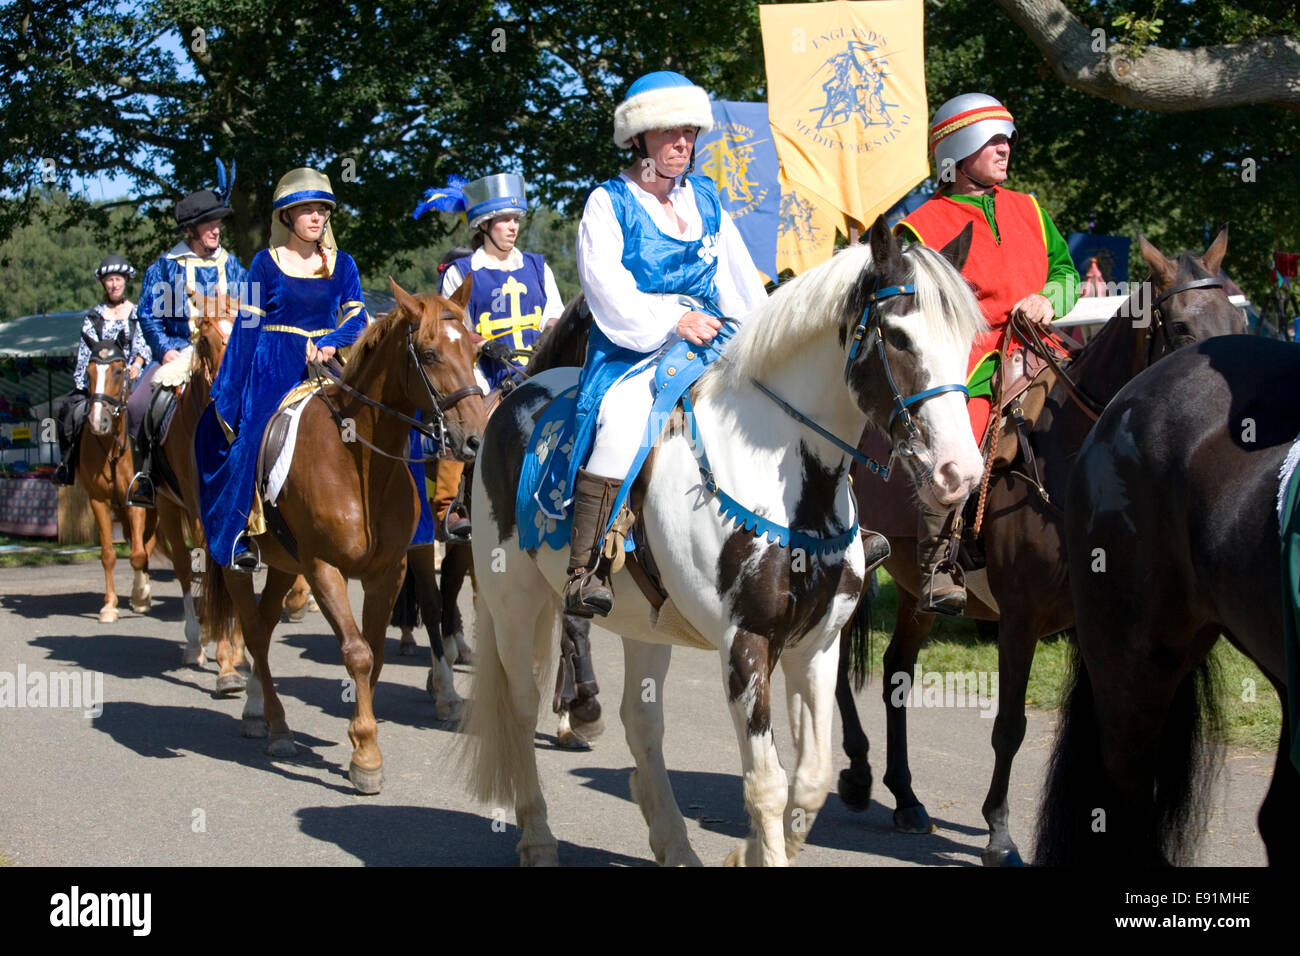 Herstmonceux, East Sussex, England. Mounted parade at medieval festival in the grounds of Herstmonceux Castle. Stock Photo